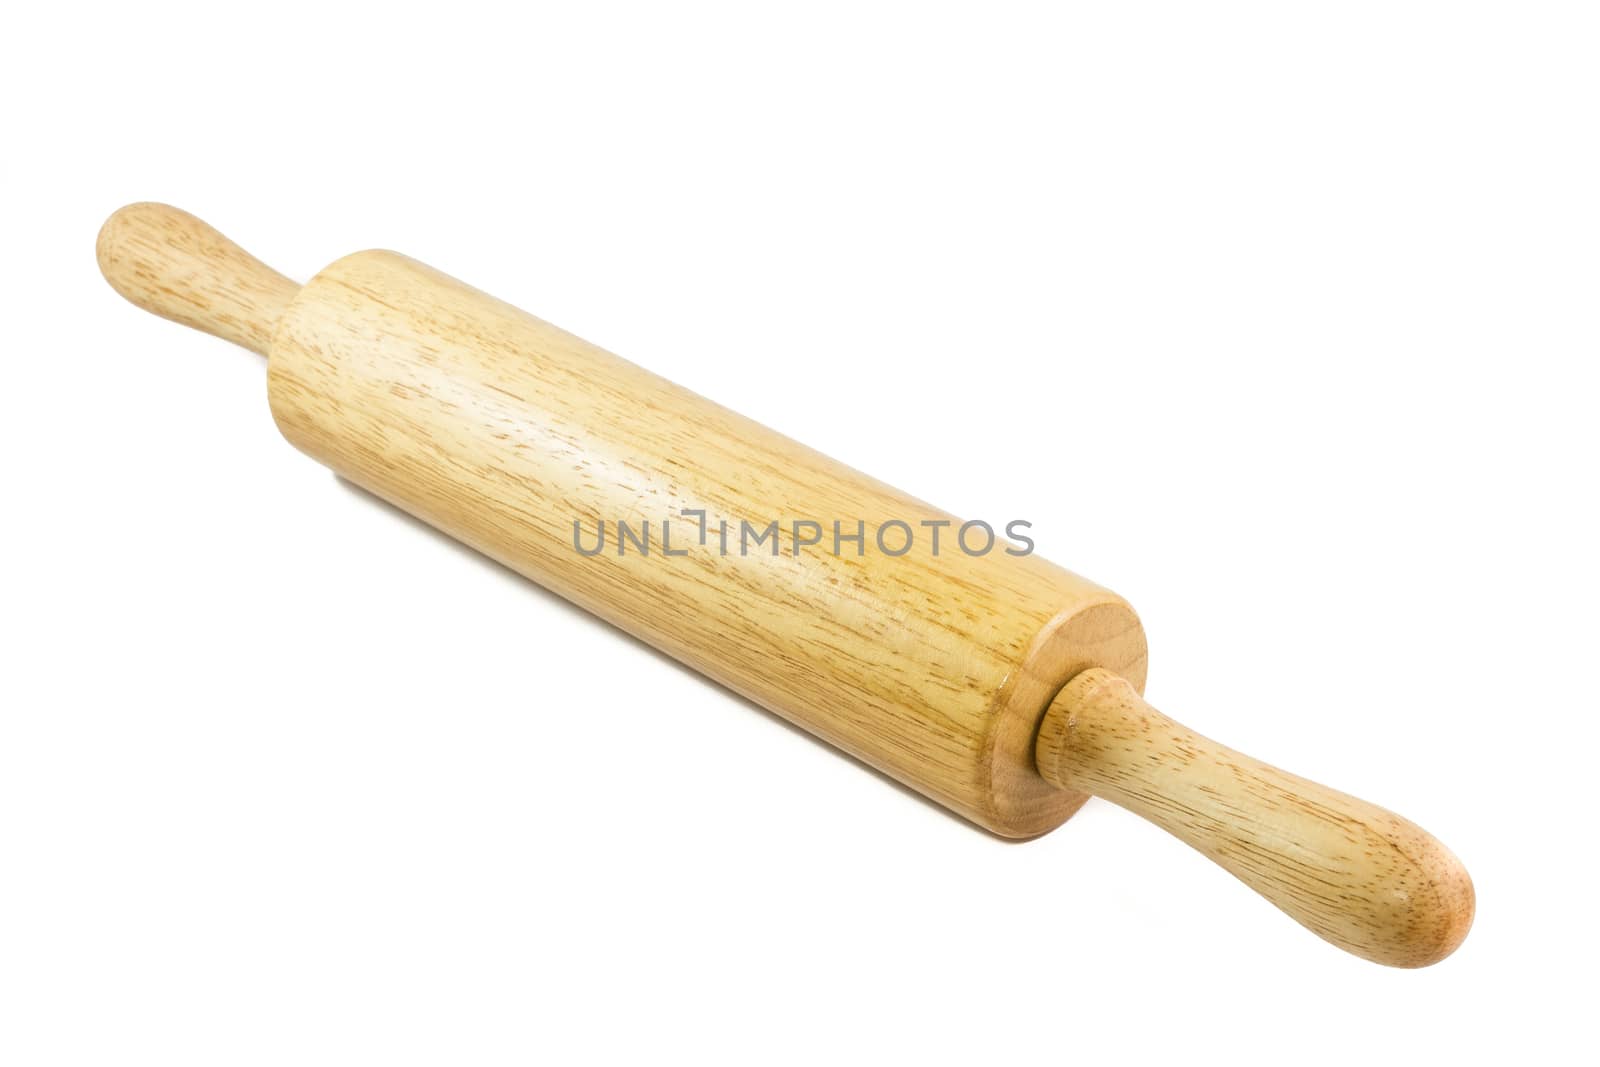 Wooden rolling pin isolated on white background